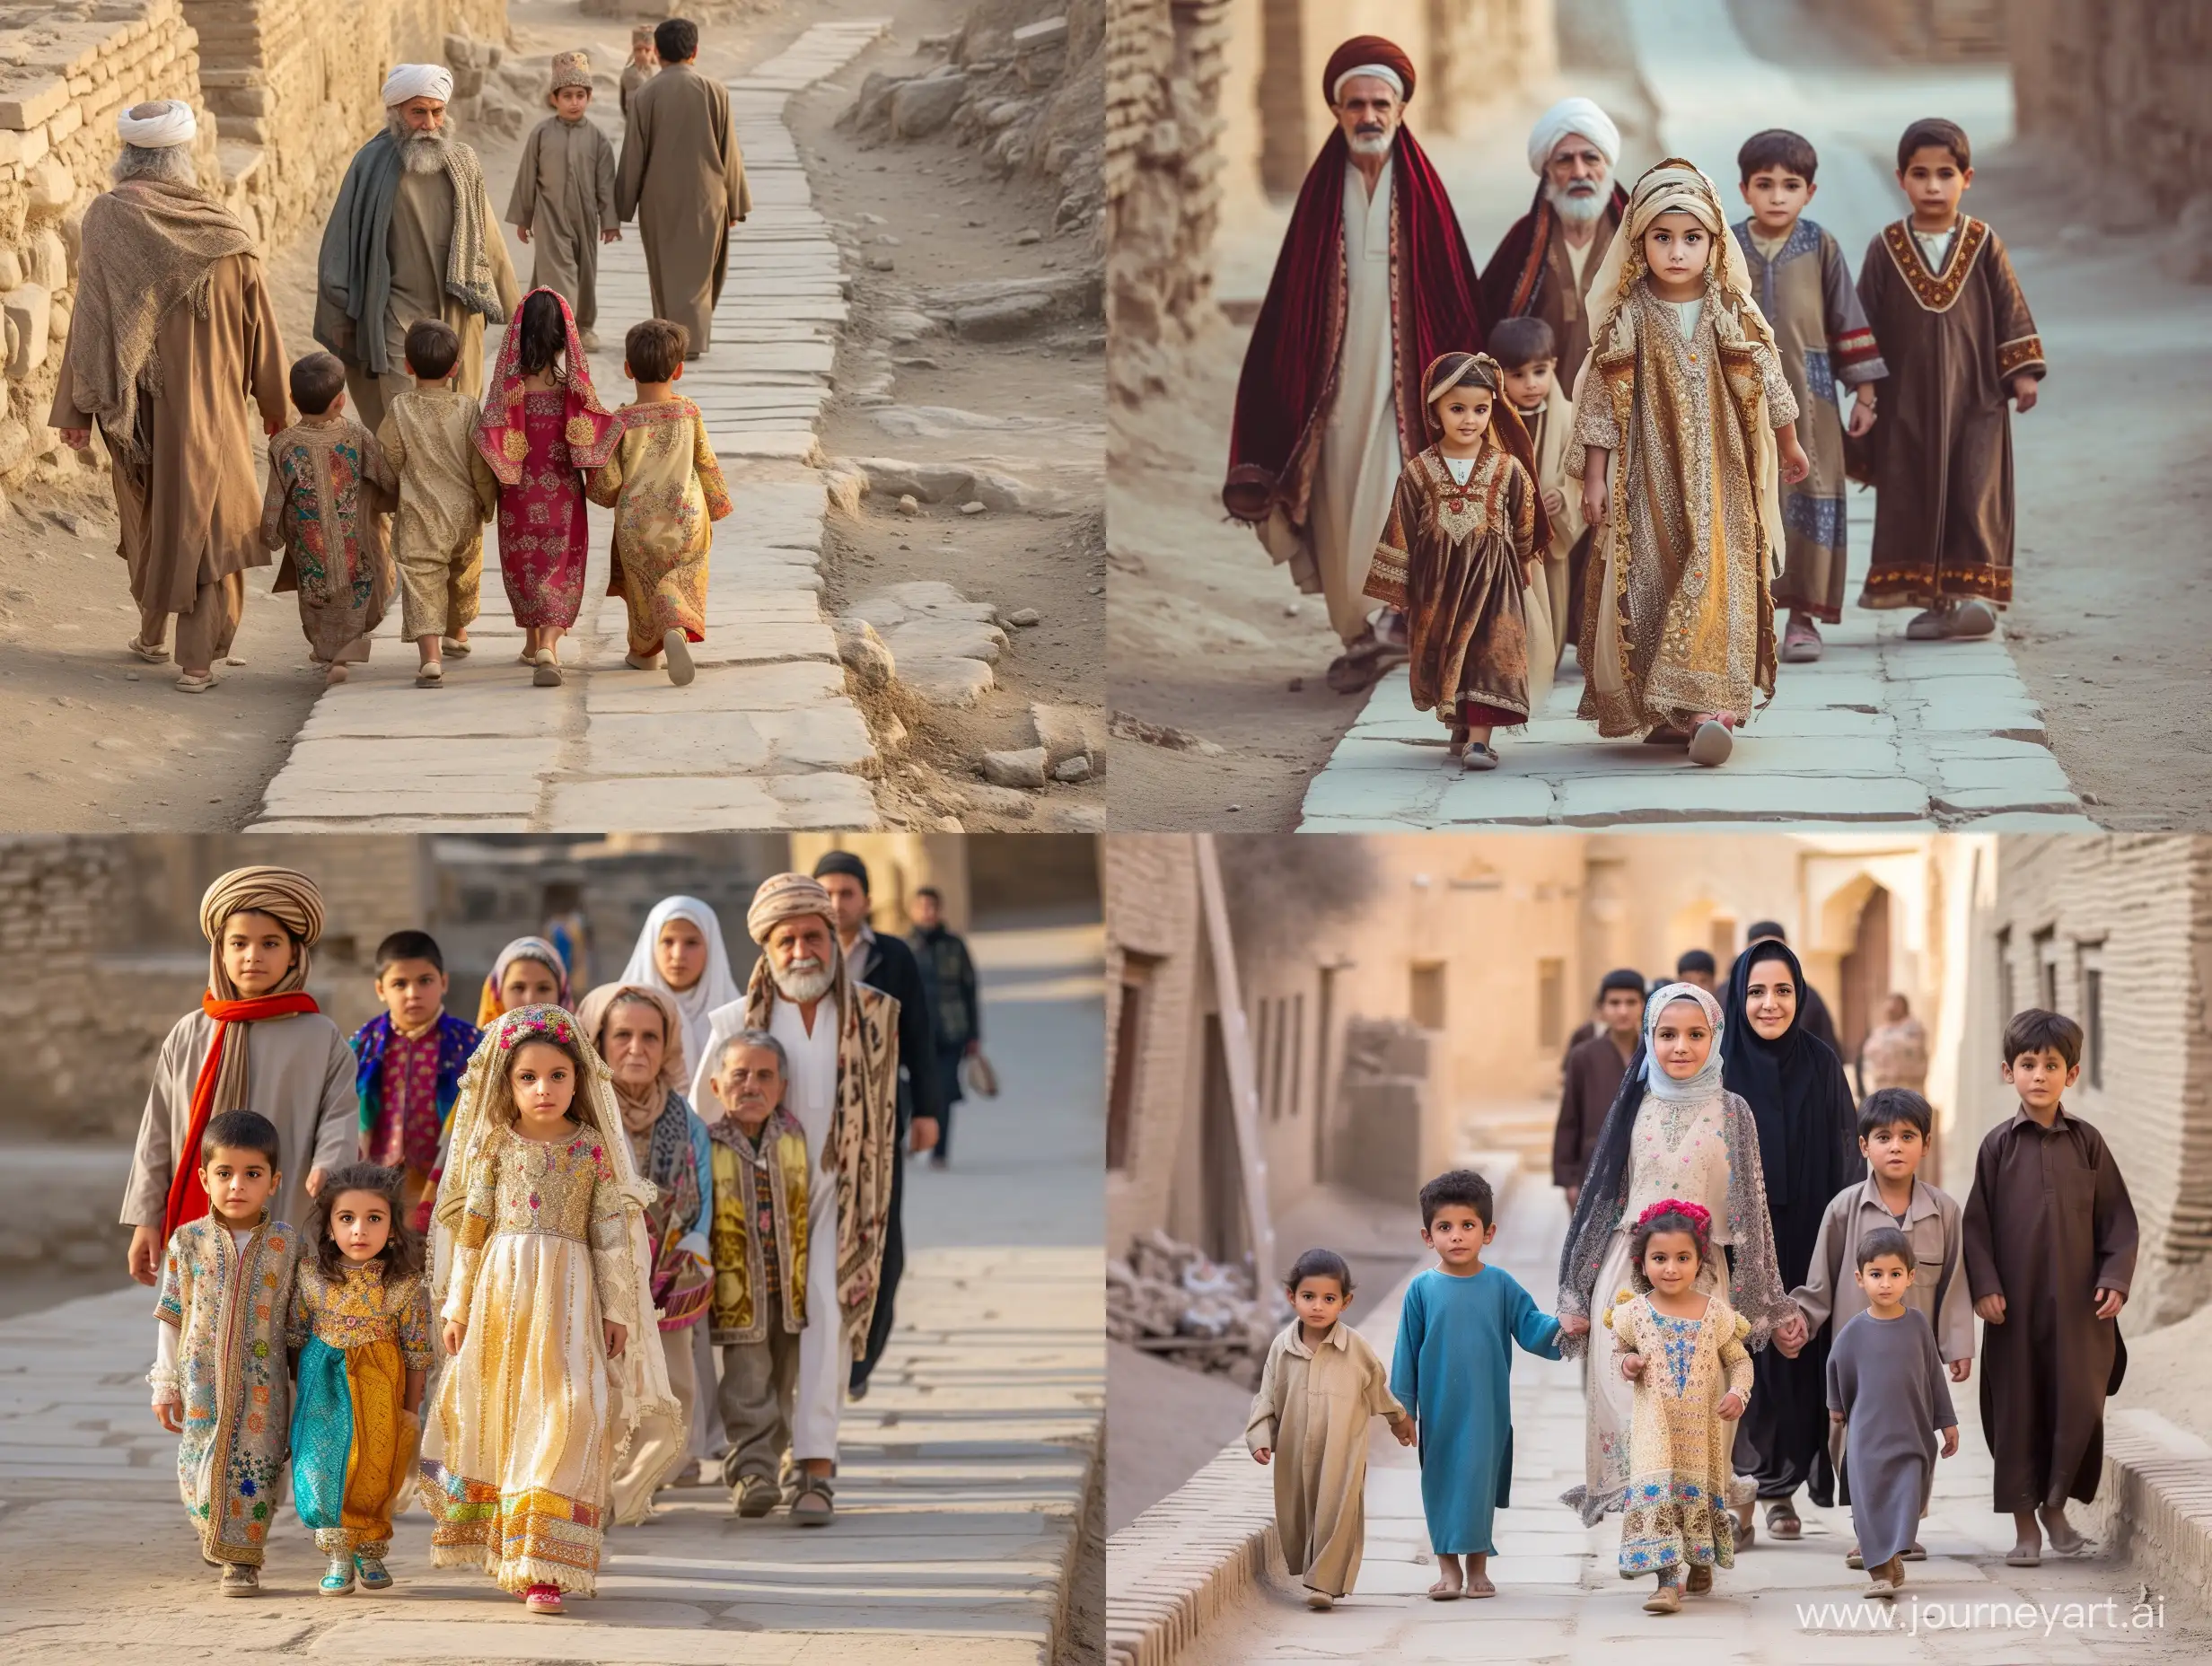 The beautiful Persian princess with her seven older brothers and their elderly parents are walking on the ancient sidewalks of the Bam Citadel.